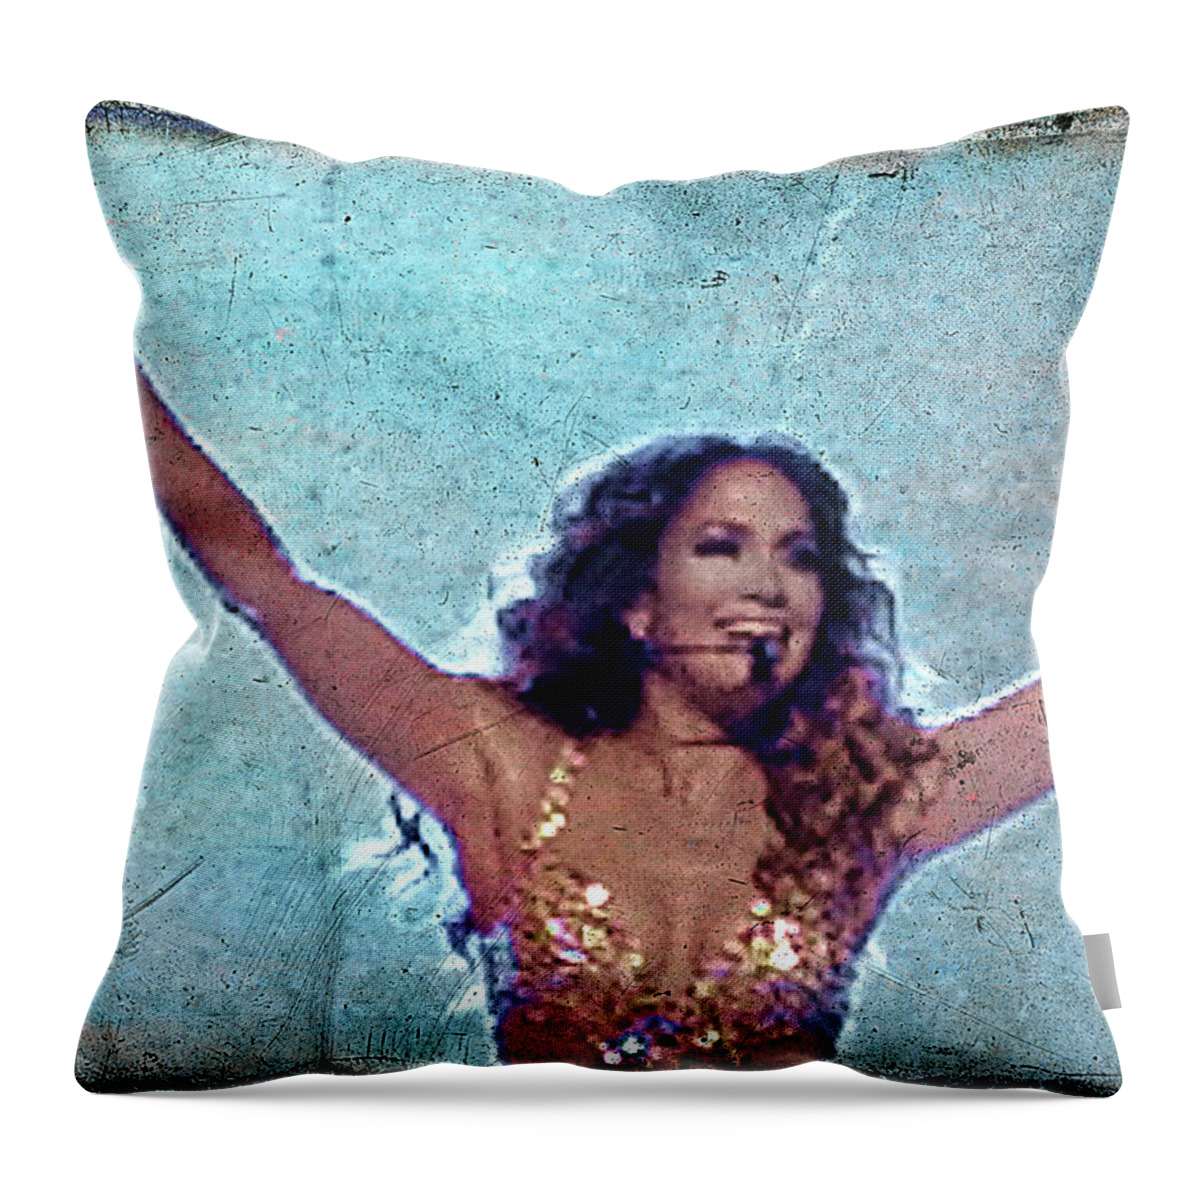 Jlo Throw Pillow featuring the photograph JLo by Julie Niemela